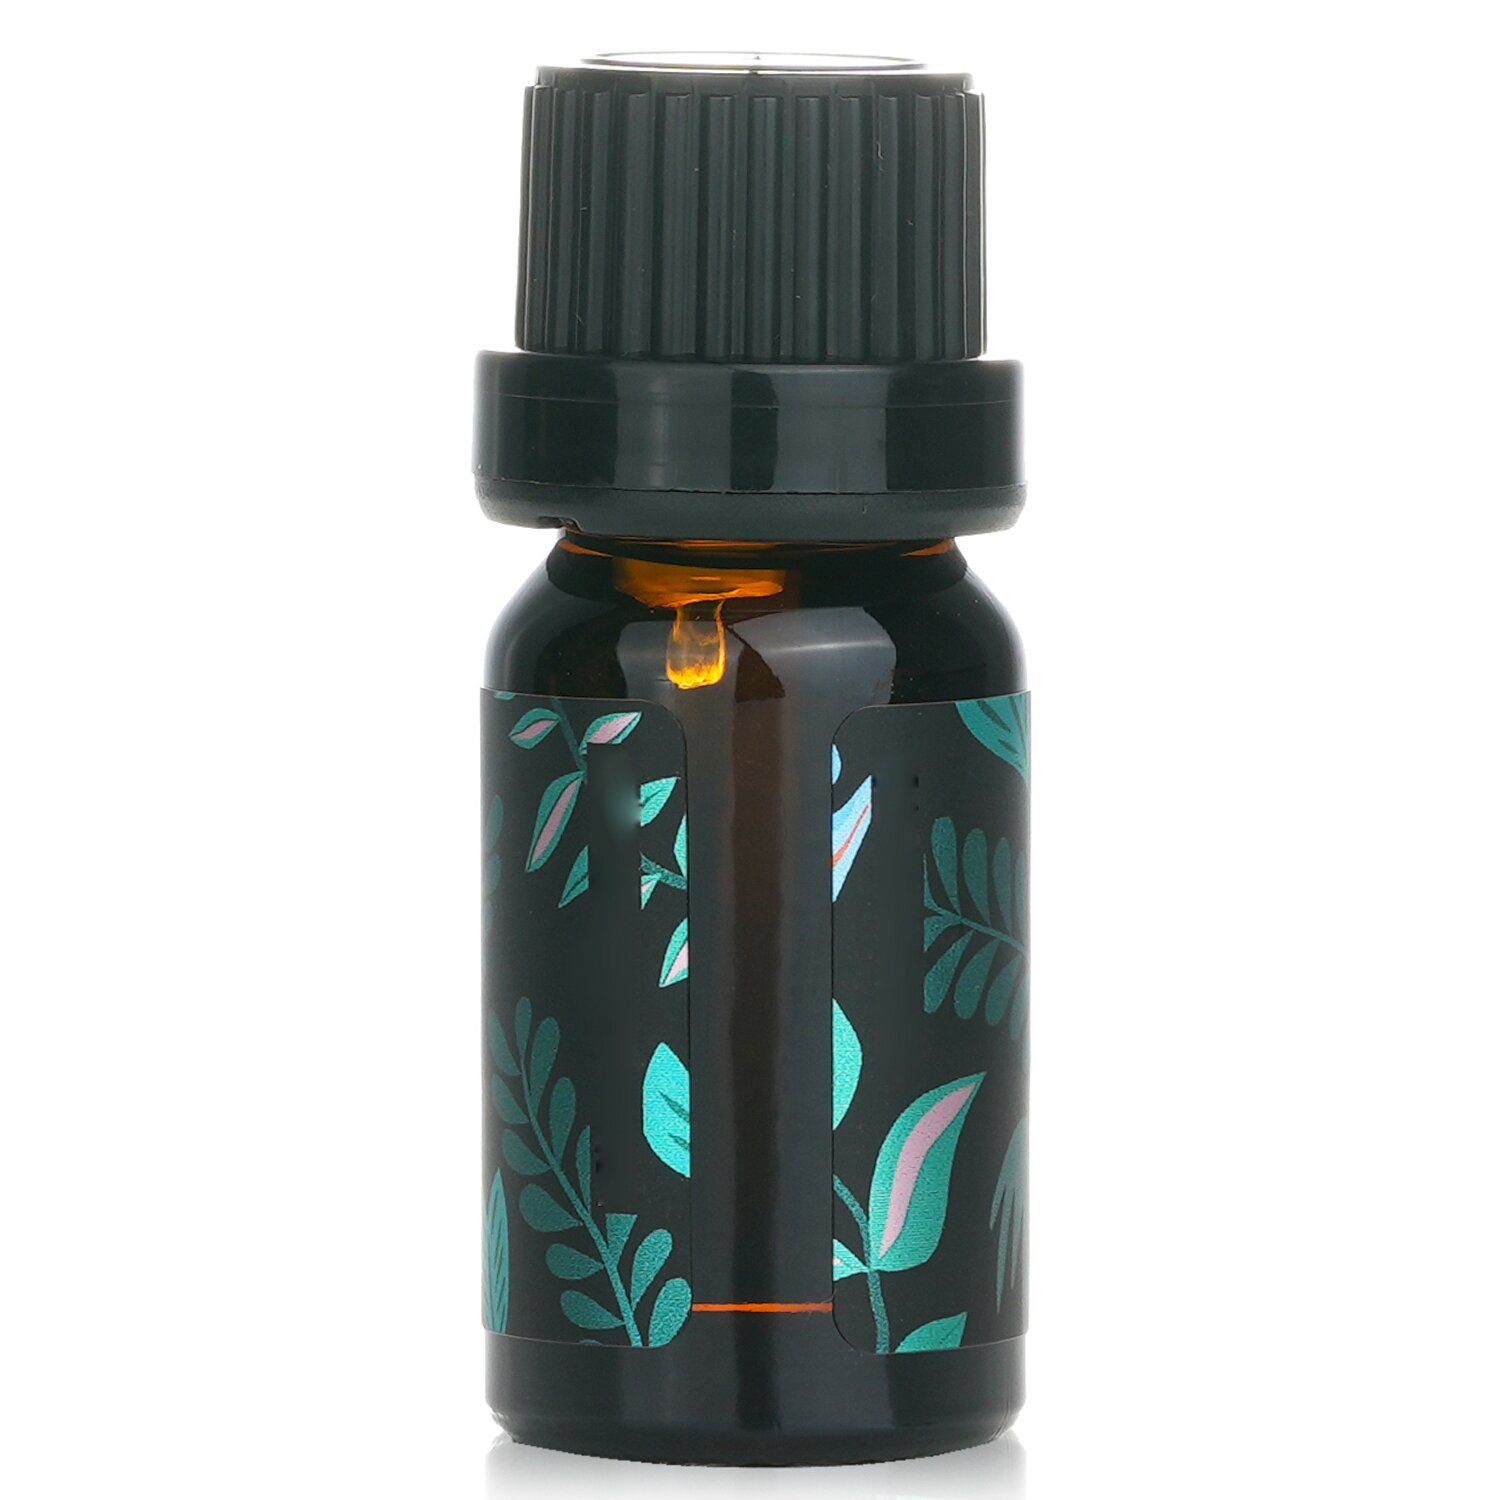 Natural Beauty Essential Oil - Peppermint 10ml/0.34oz